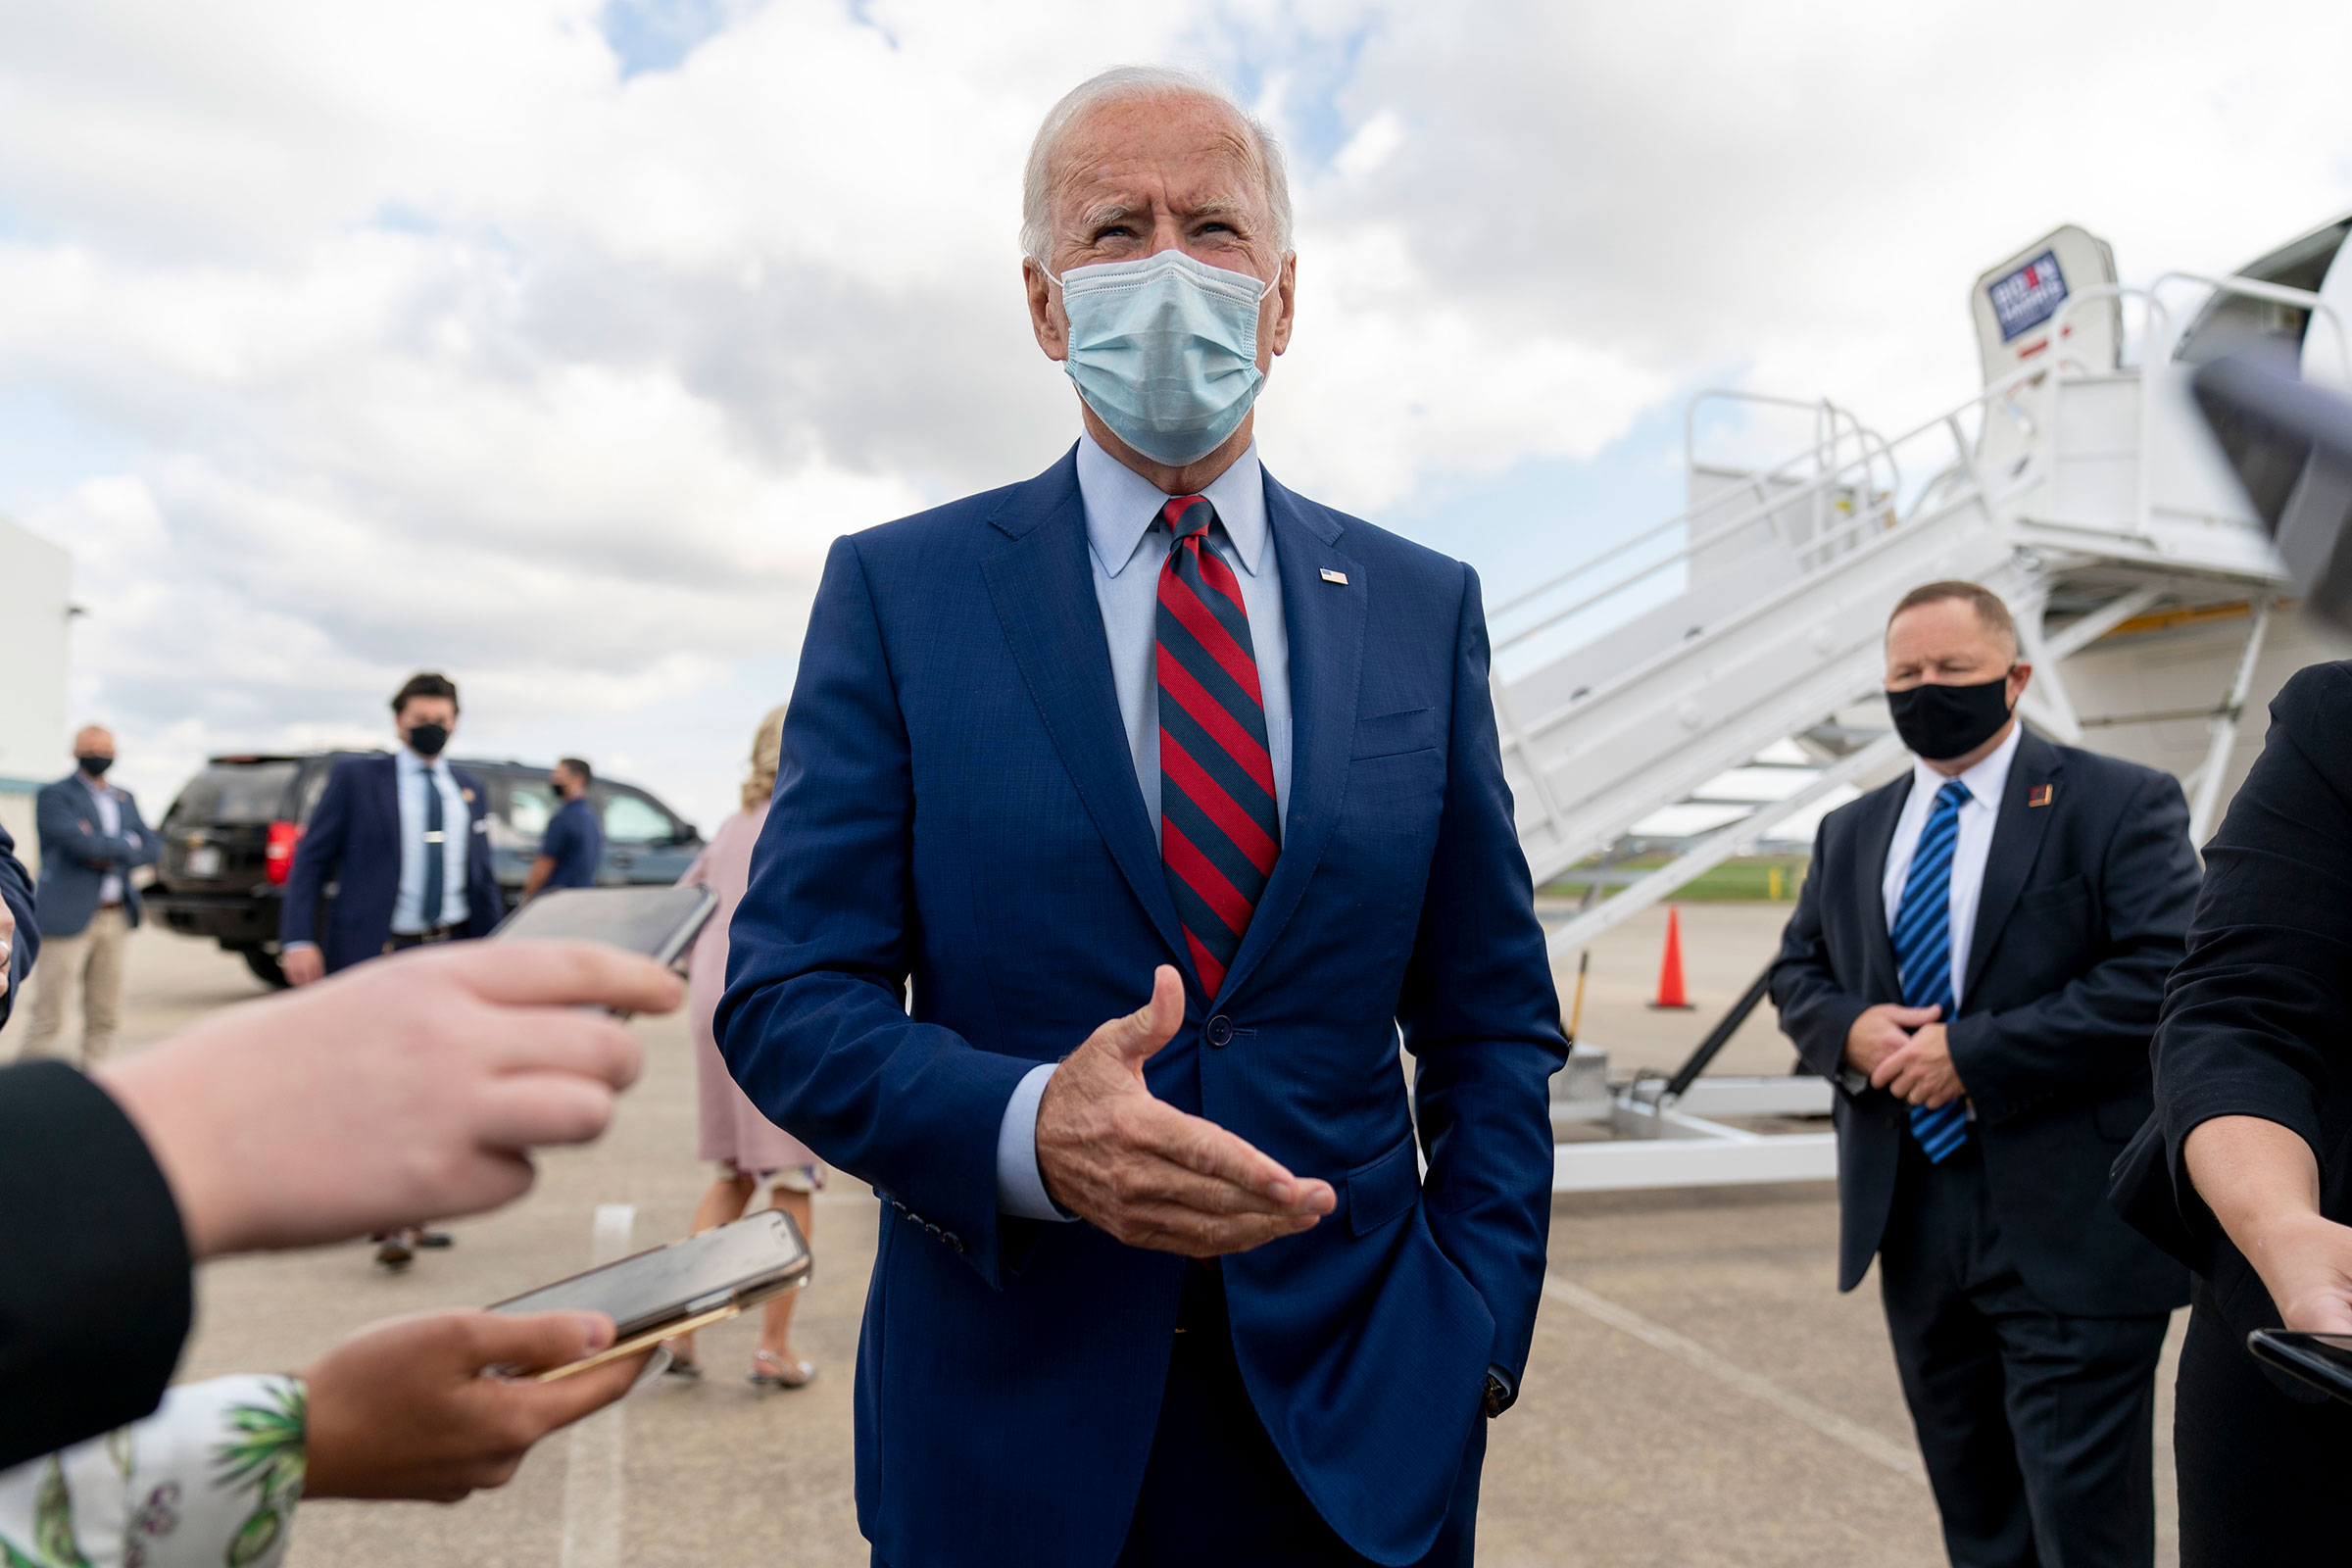 Democratic presidential candidate former Vice President Joe Biden speaks to member of the media before boarding his campaign plane at New Castle Airport in New Castle, Del., on Oct. 5, 2020. (Andrew Harnik—AP)